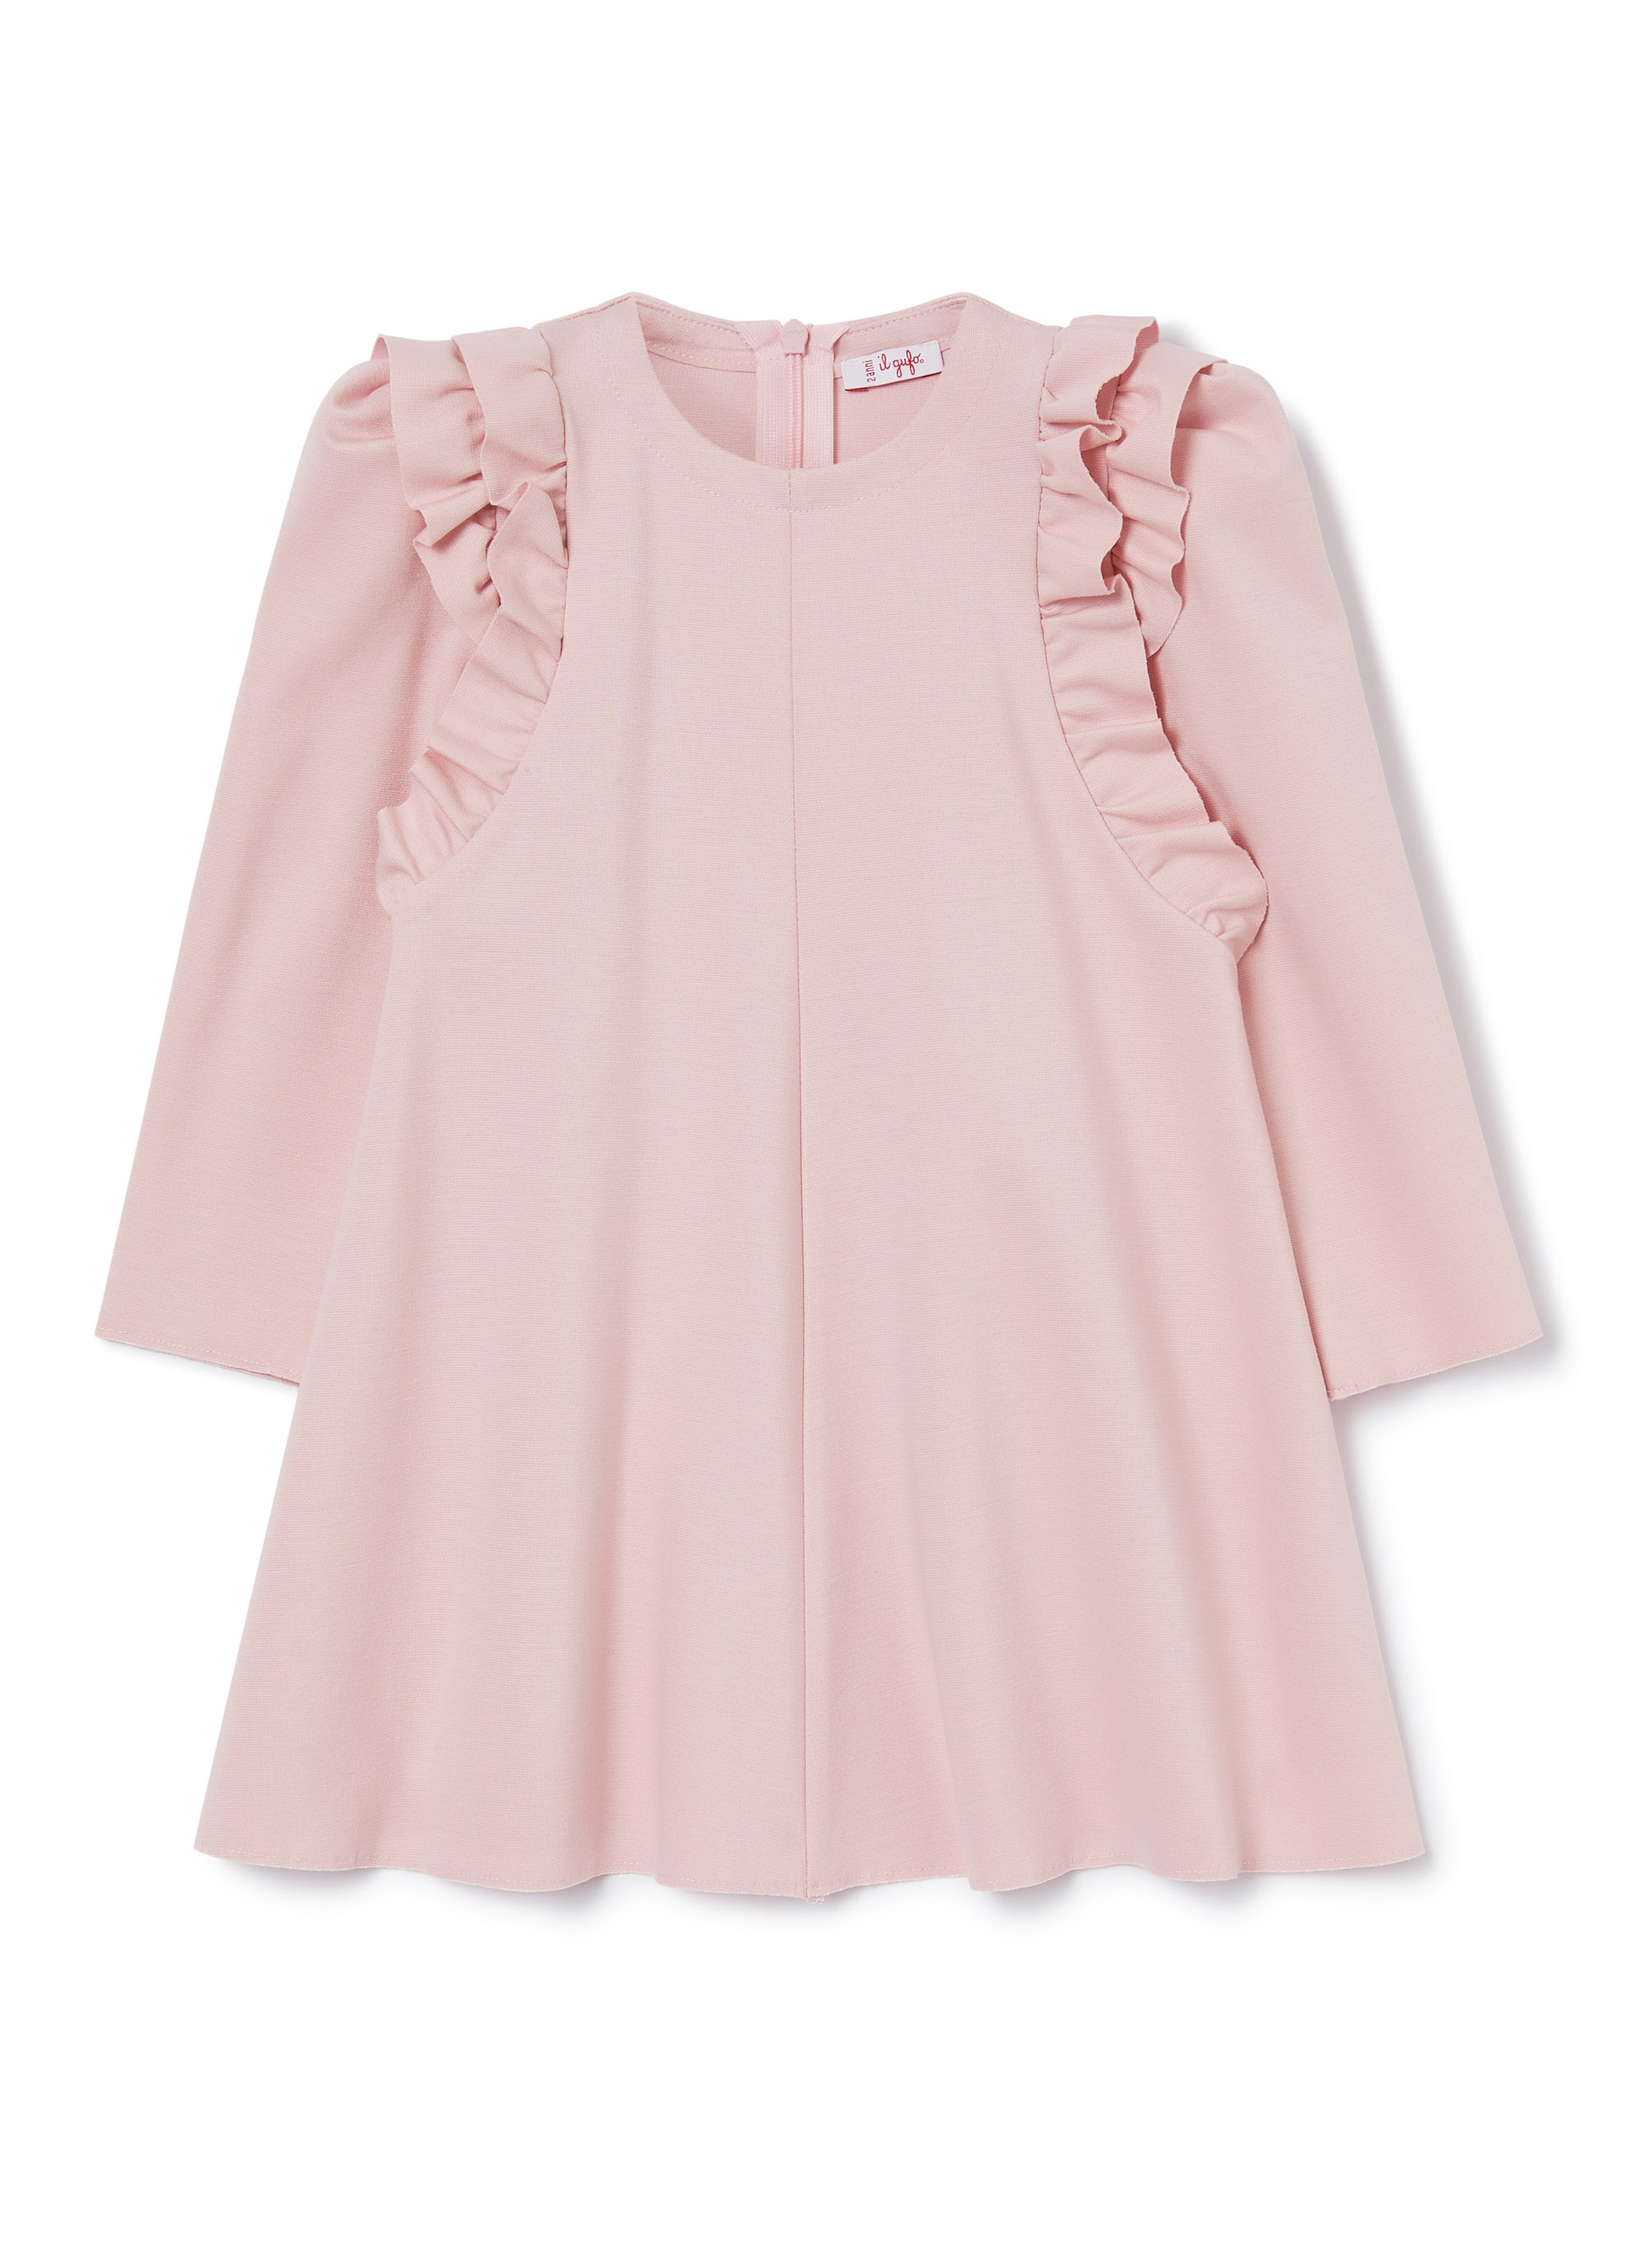 pink dress with ruffles